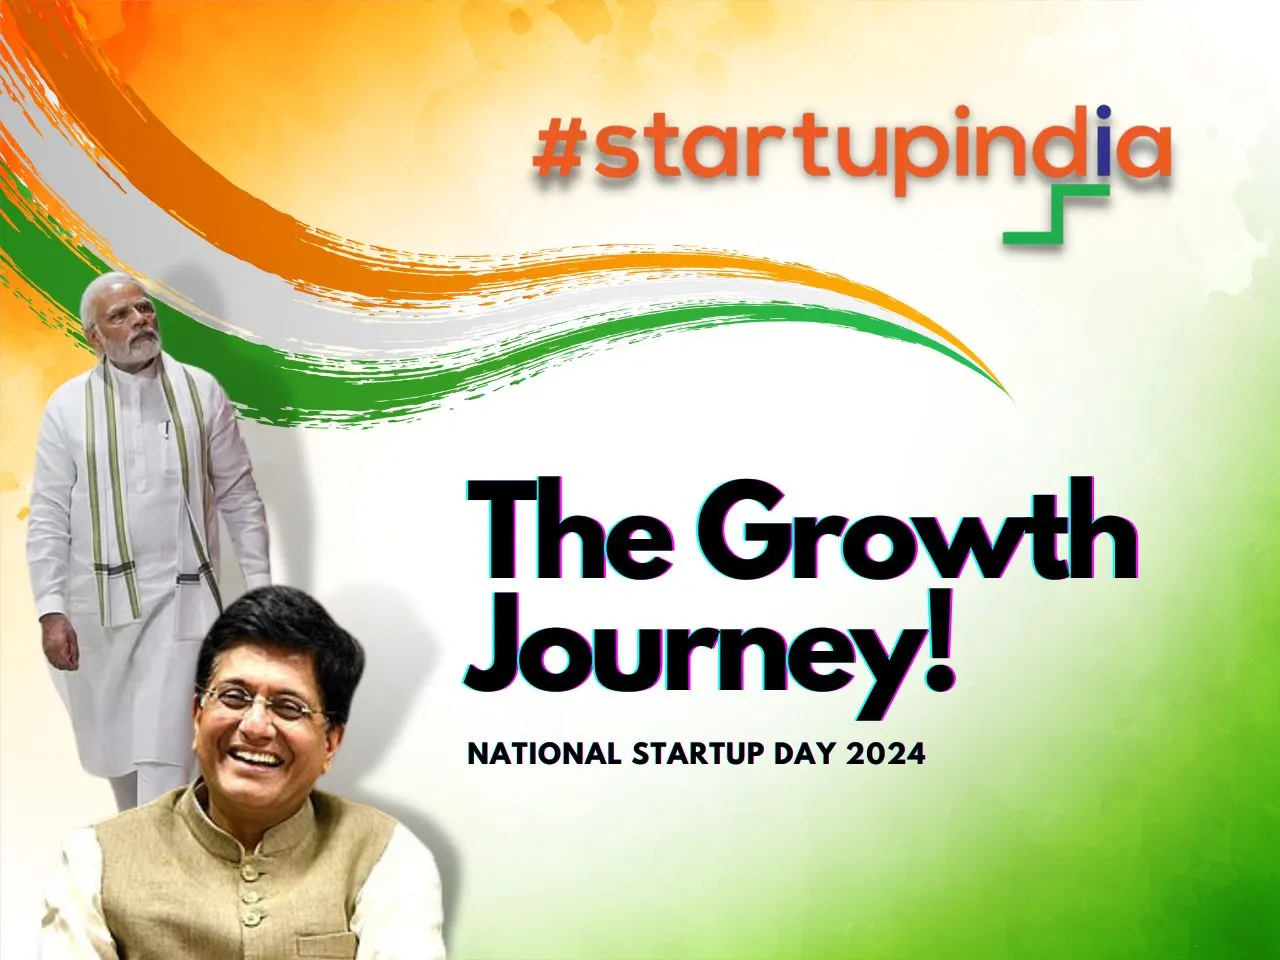 National Startup Day Growth Story of the Indian Startup Ecosystem